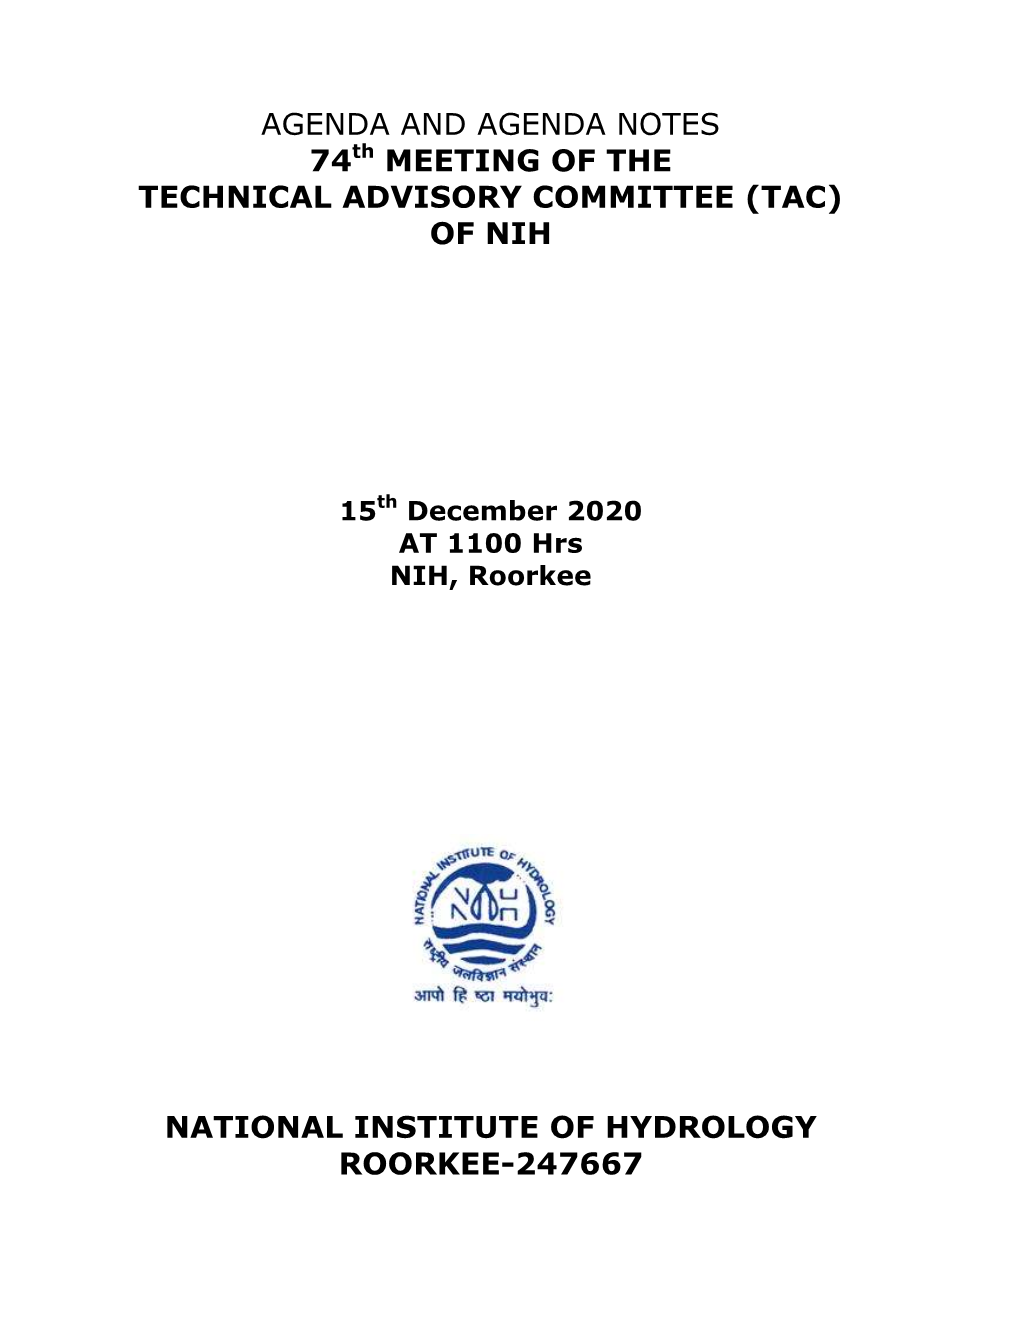 (Tac) of Nih National Institute of Hydrology Roorkee